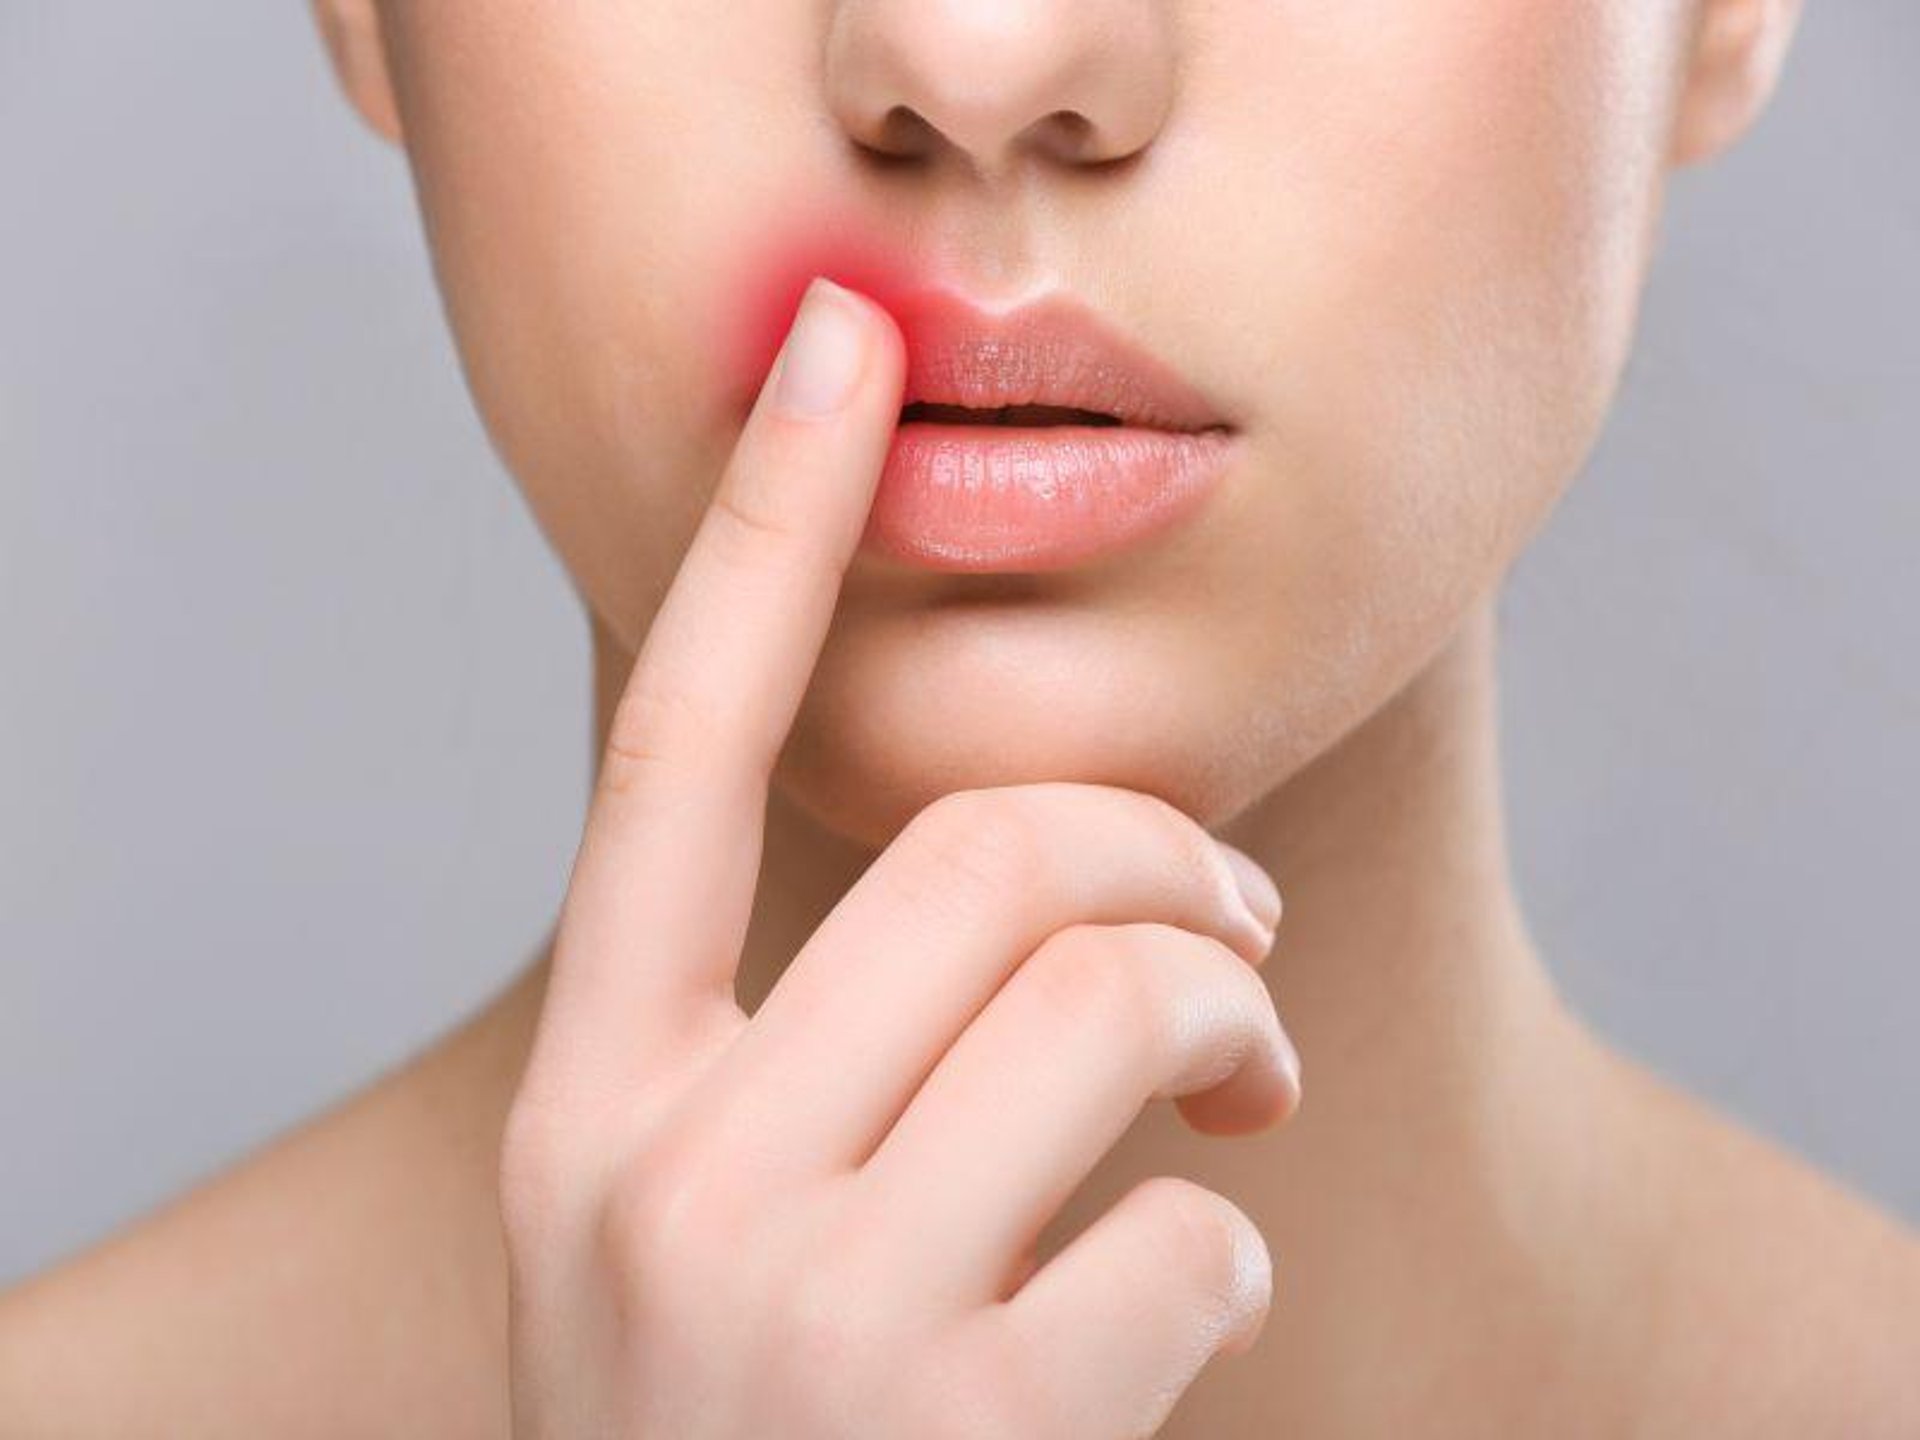 What Causes Herpes Cold Sore Flare-Ups? New Study Offers Clues thumbnail